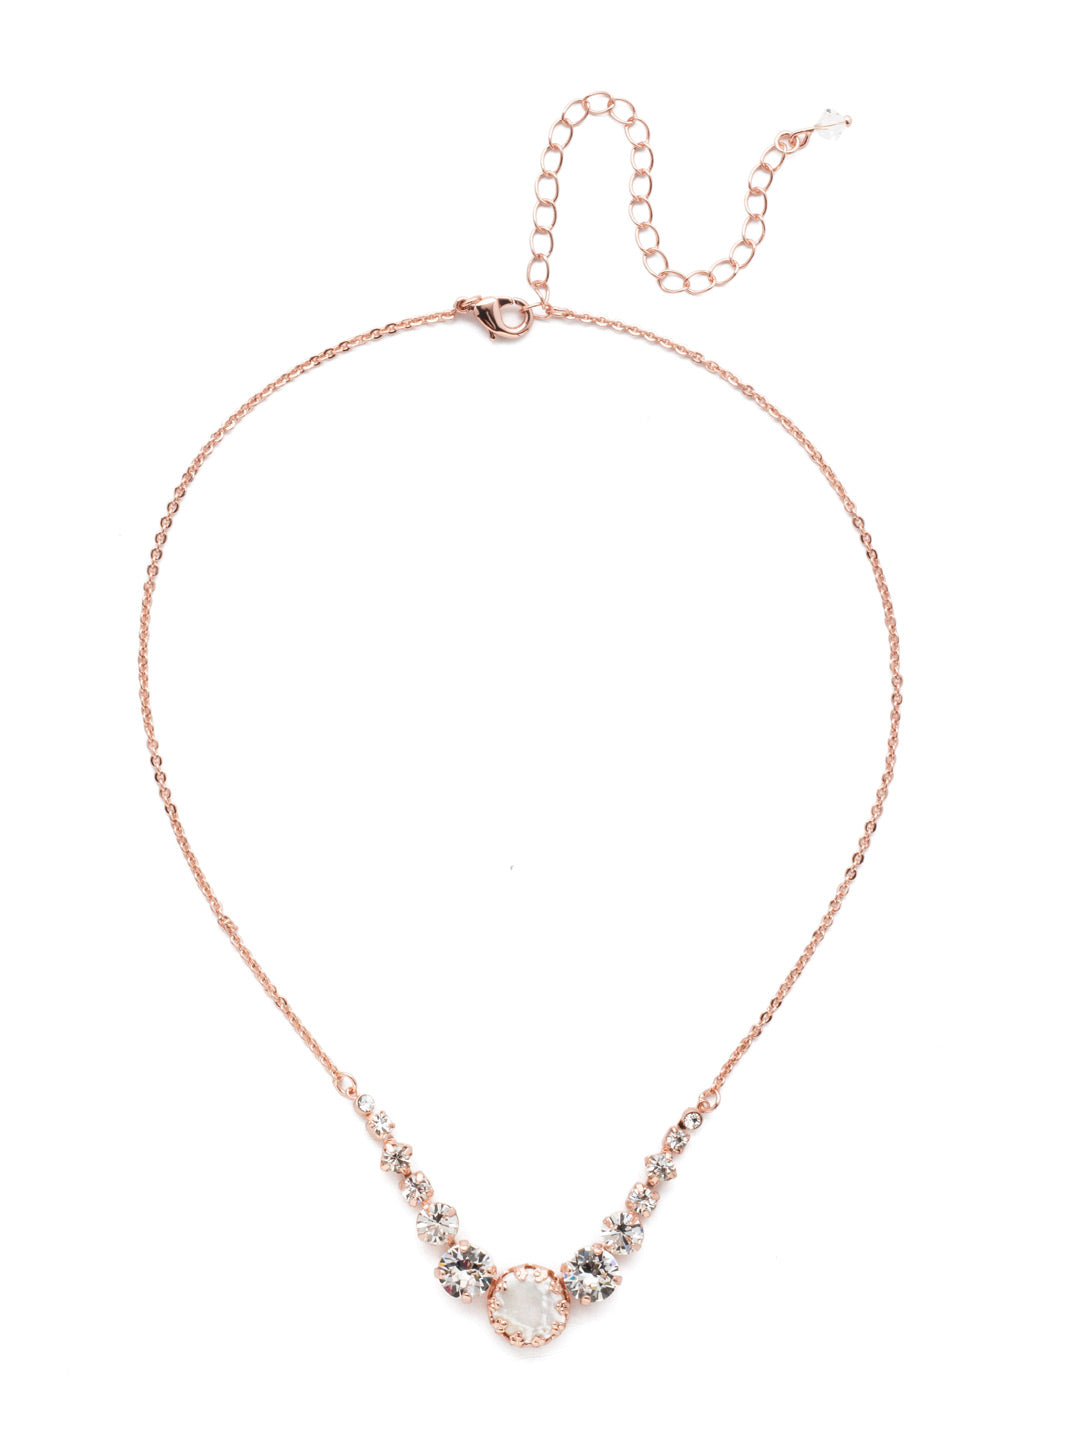 Meera Tennis Necklace - NEF43RGCRY - <p>This simple necklace combines one circular stone with several symmetrical stones on either side to add some sparkle to any look. From Sorrelli's Crystal collection in our Rose Gold-tone finish.</p>